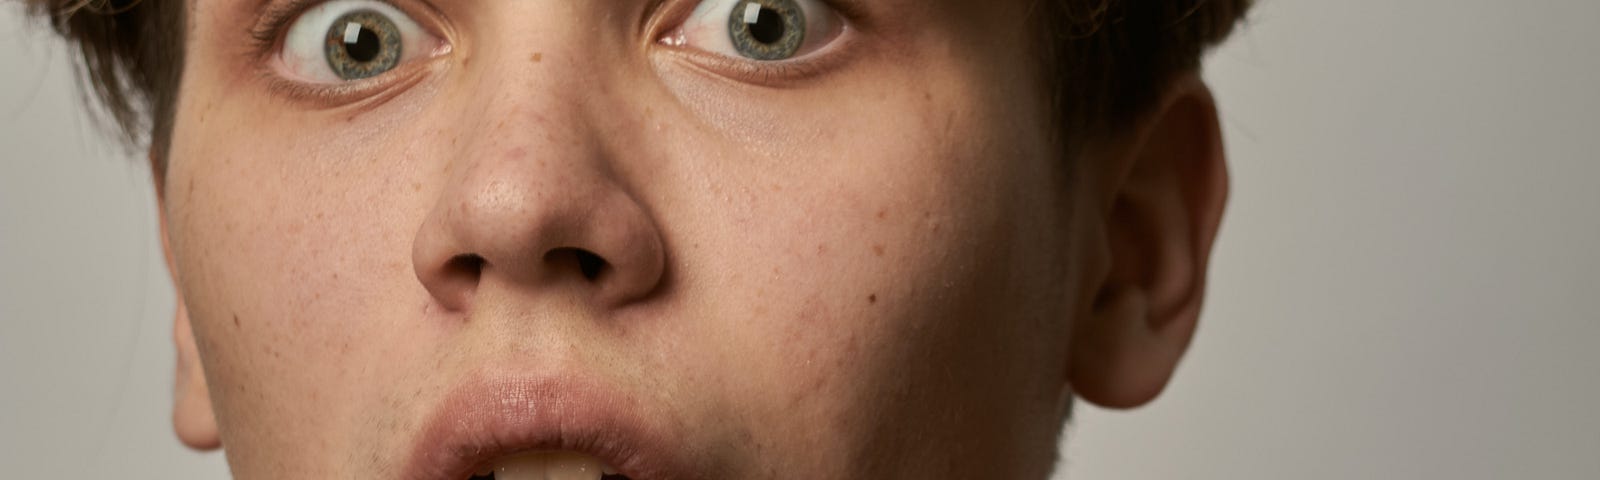 Close up of surprised young man’s face.